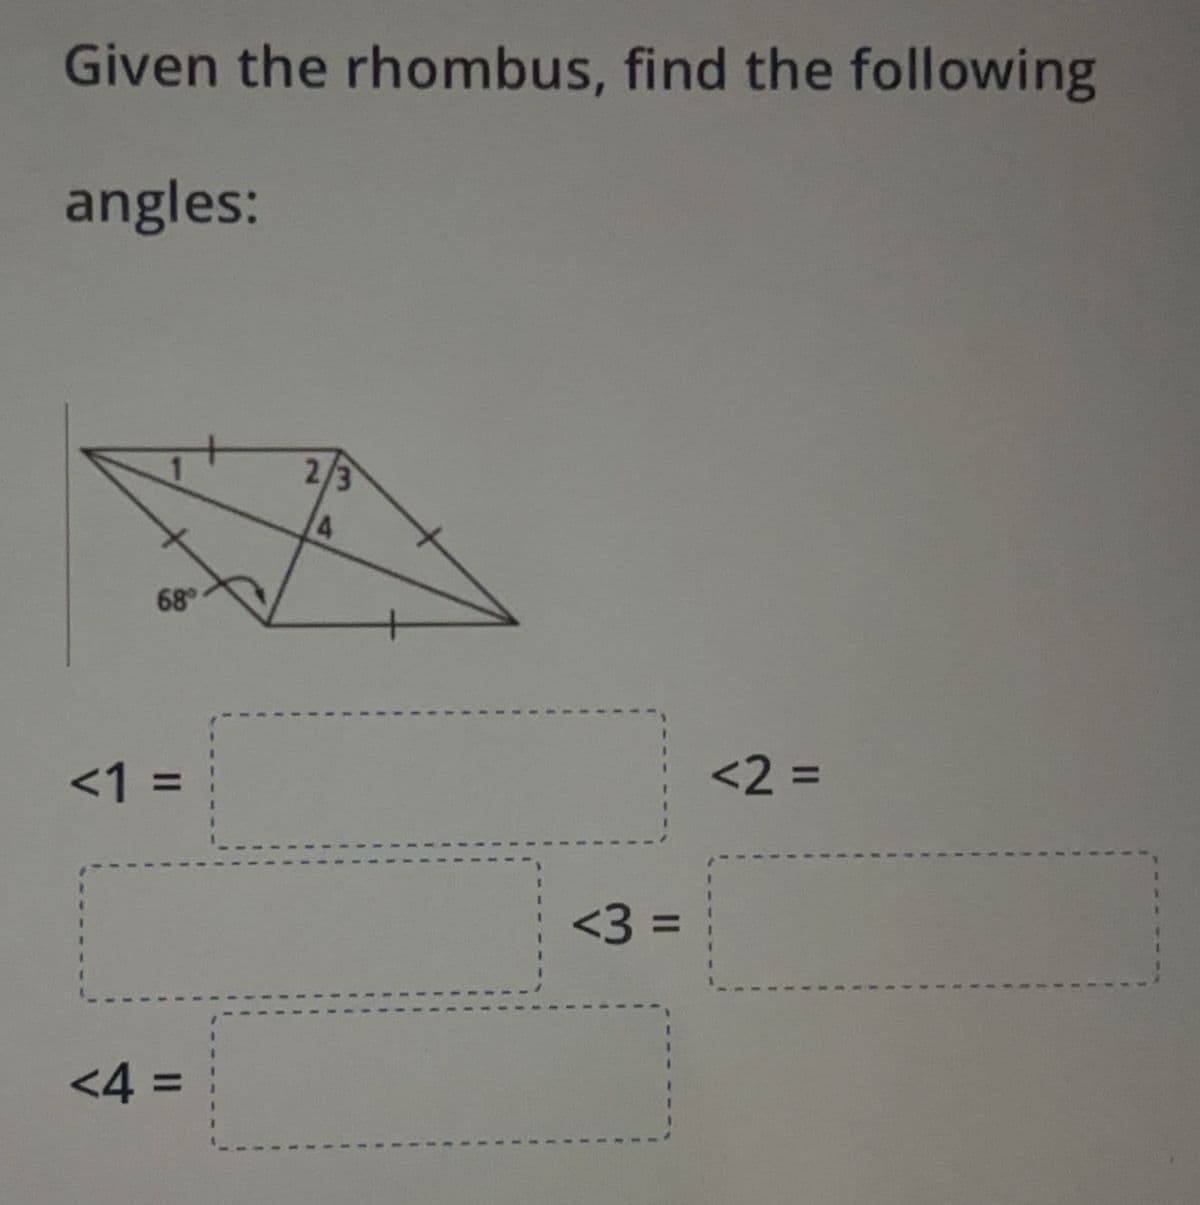 Given the rhombus, find the following
angles:
68⁰
<1 =
<4=
2/3
<3 =
<2 =